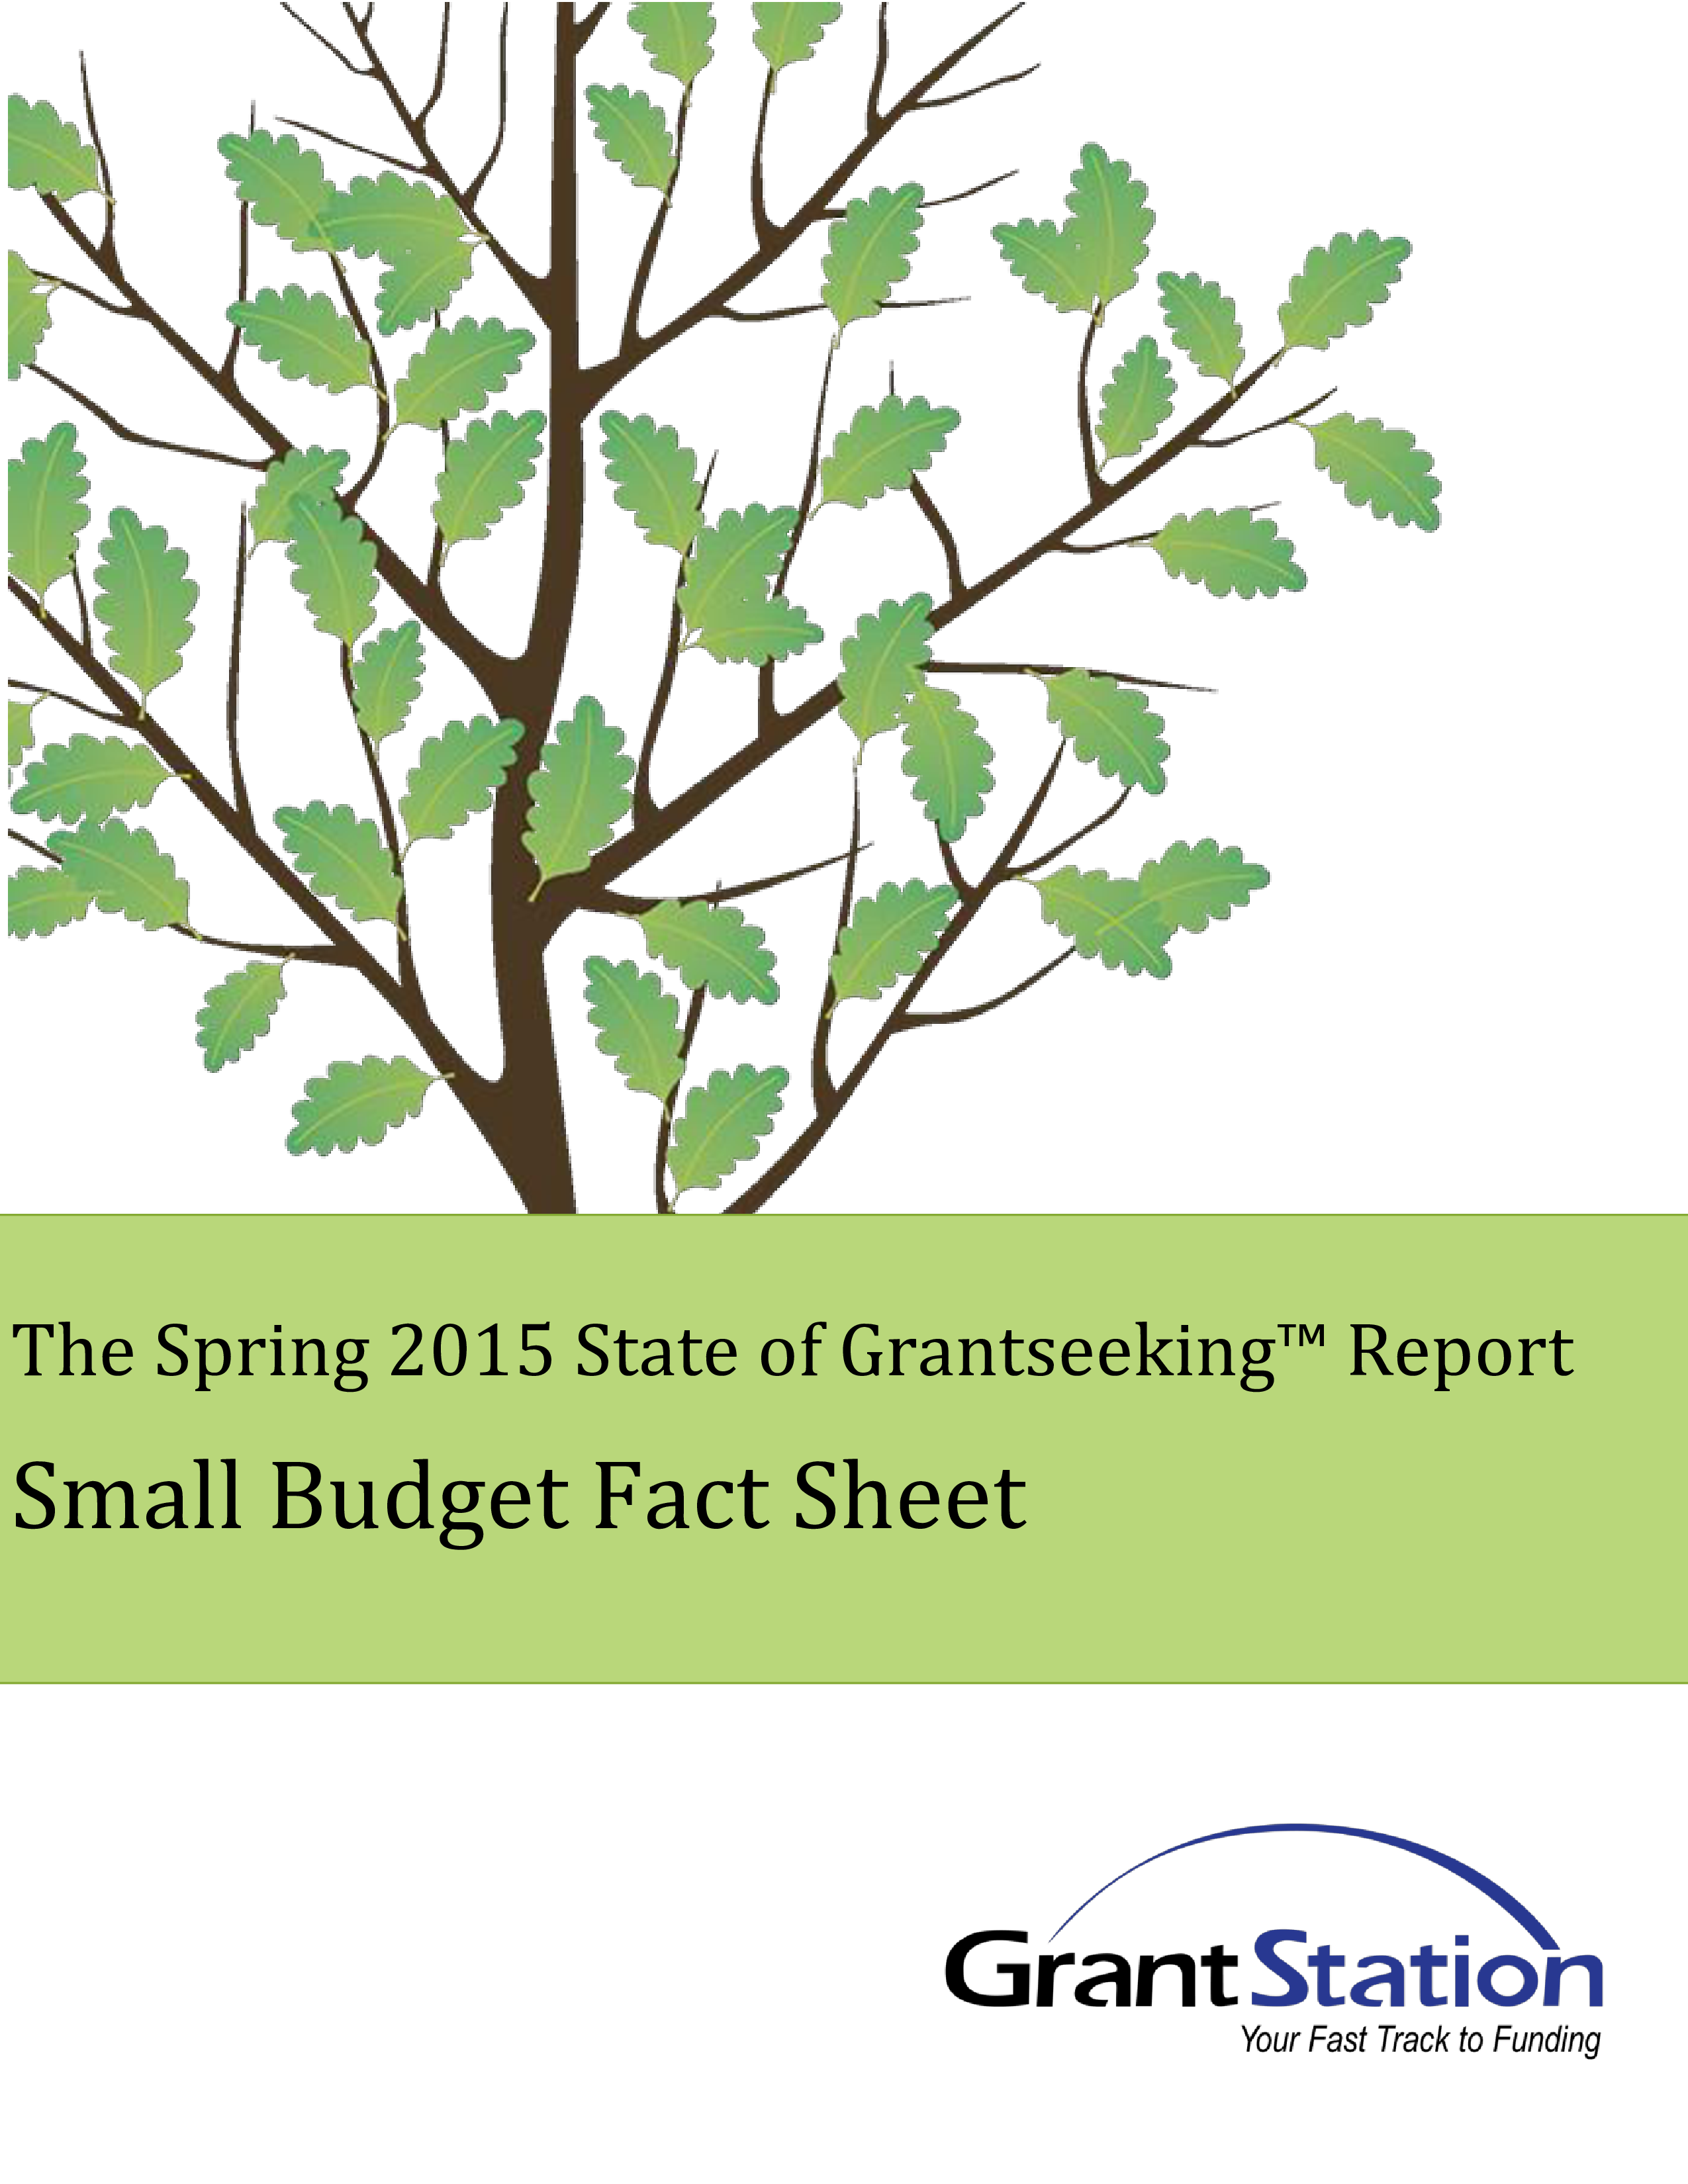 Small Business Annual Budget main image